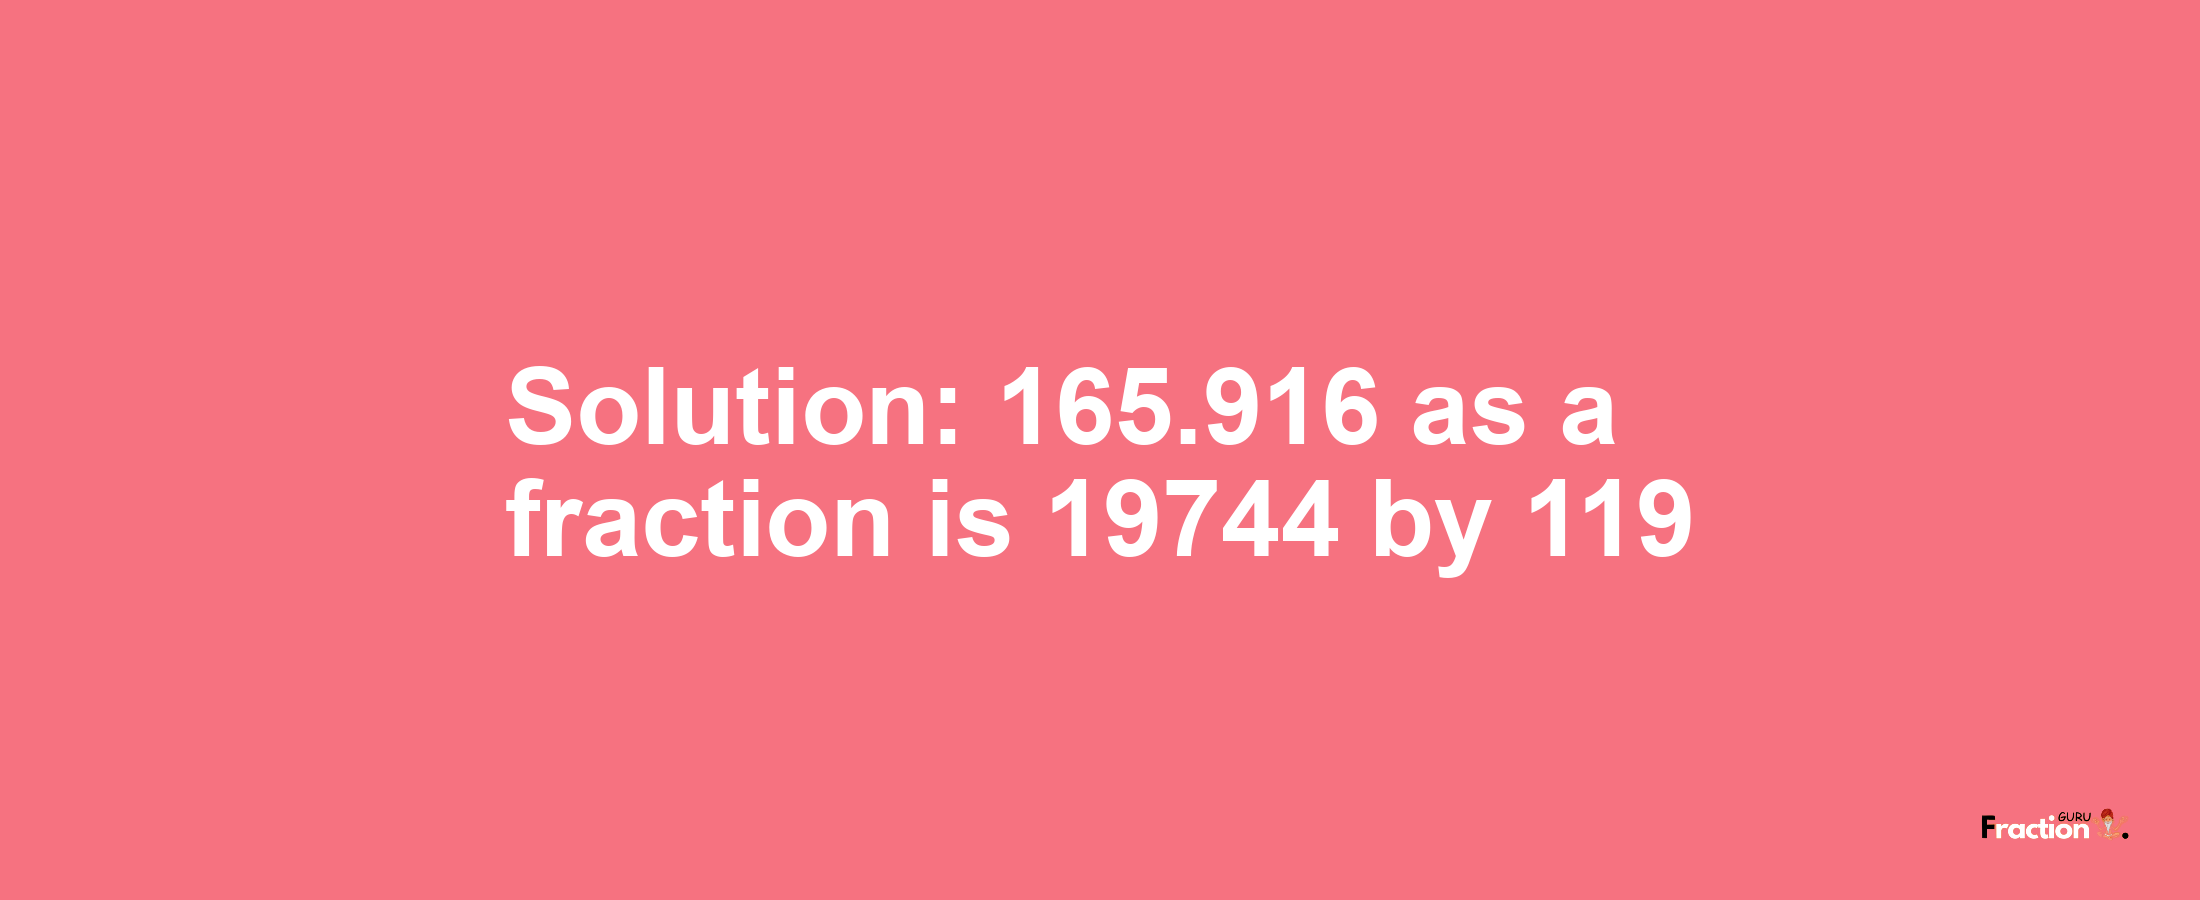 Solution:165.916 as a fraction is 19744/119